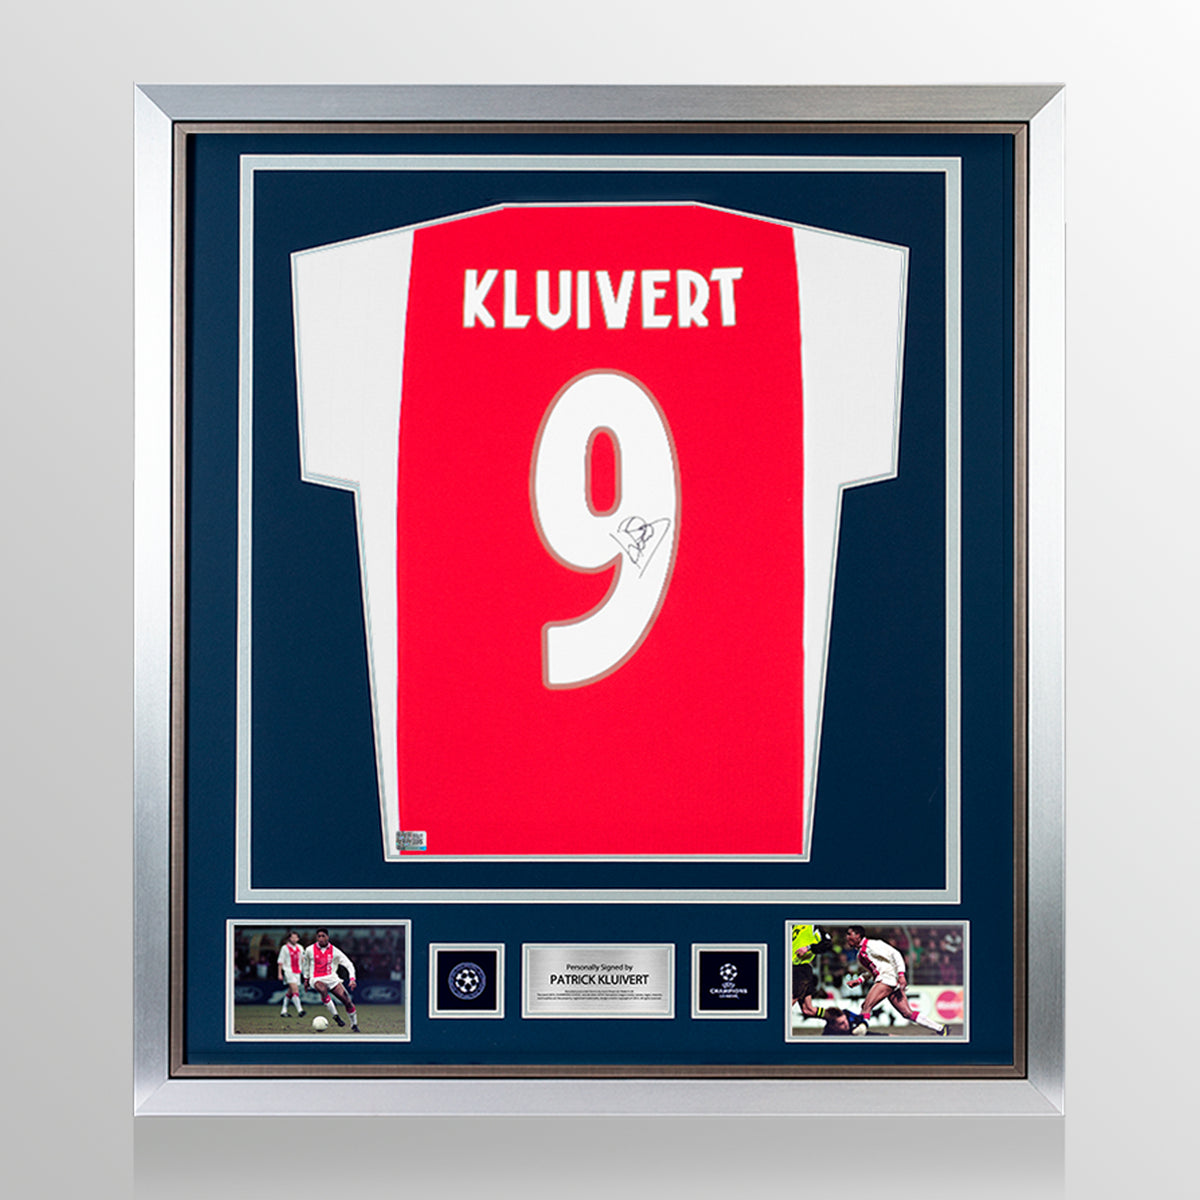 Patrick Kluivert Official UEFA Champions League Back Signed and Framed Modern Ajax Home Shirt